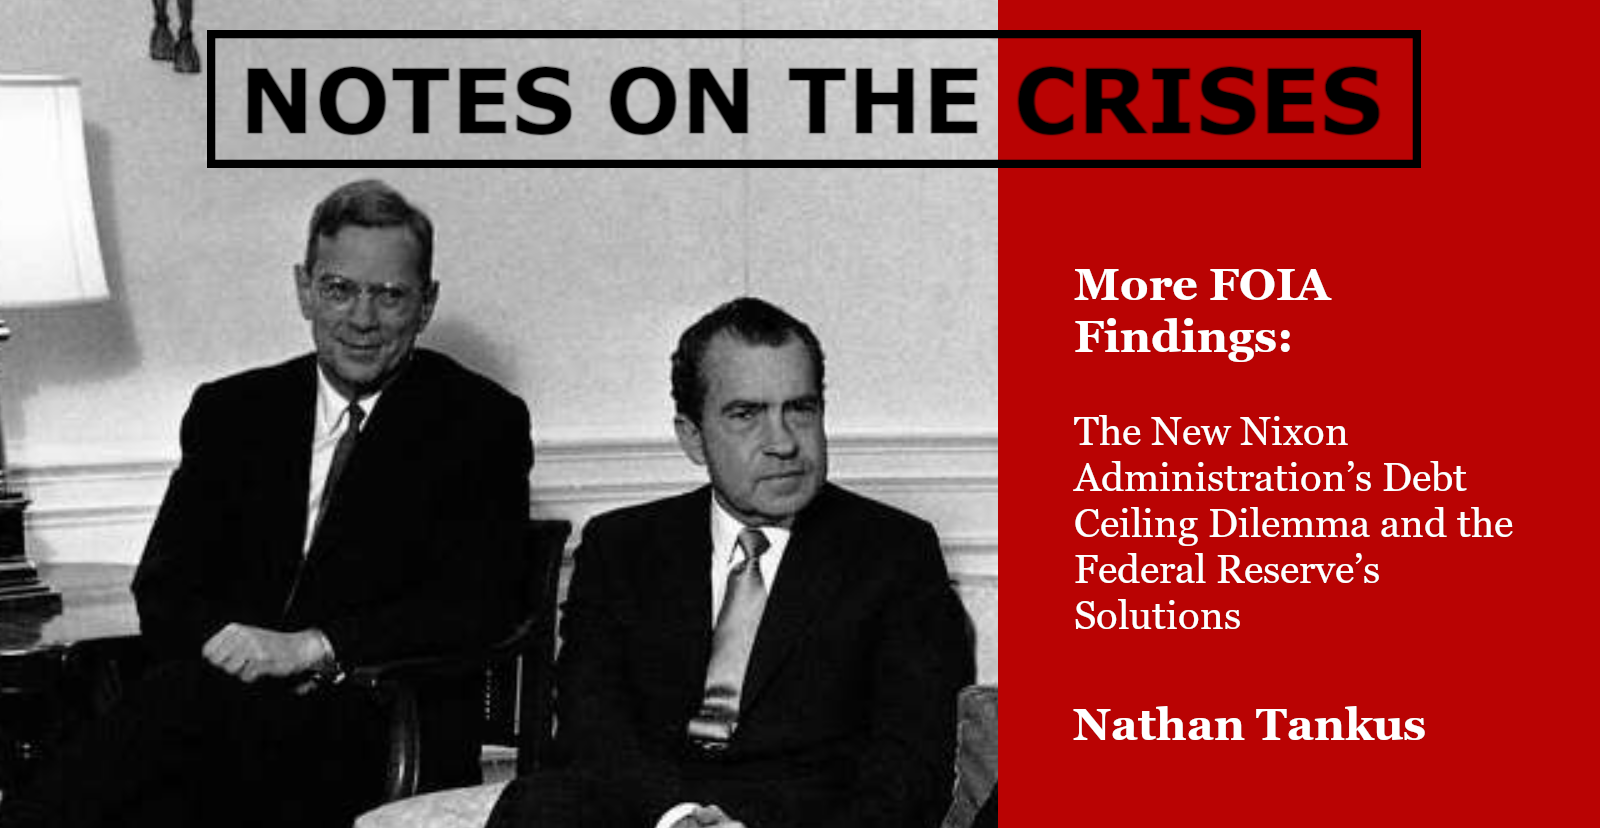 More FOIA Findings: The New Nixon Administration’s Debt Ceiling Dilemma and the Federal Reserve’s Solutions